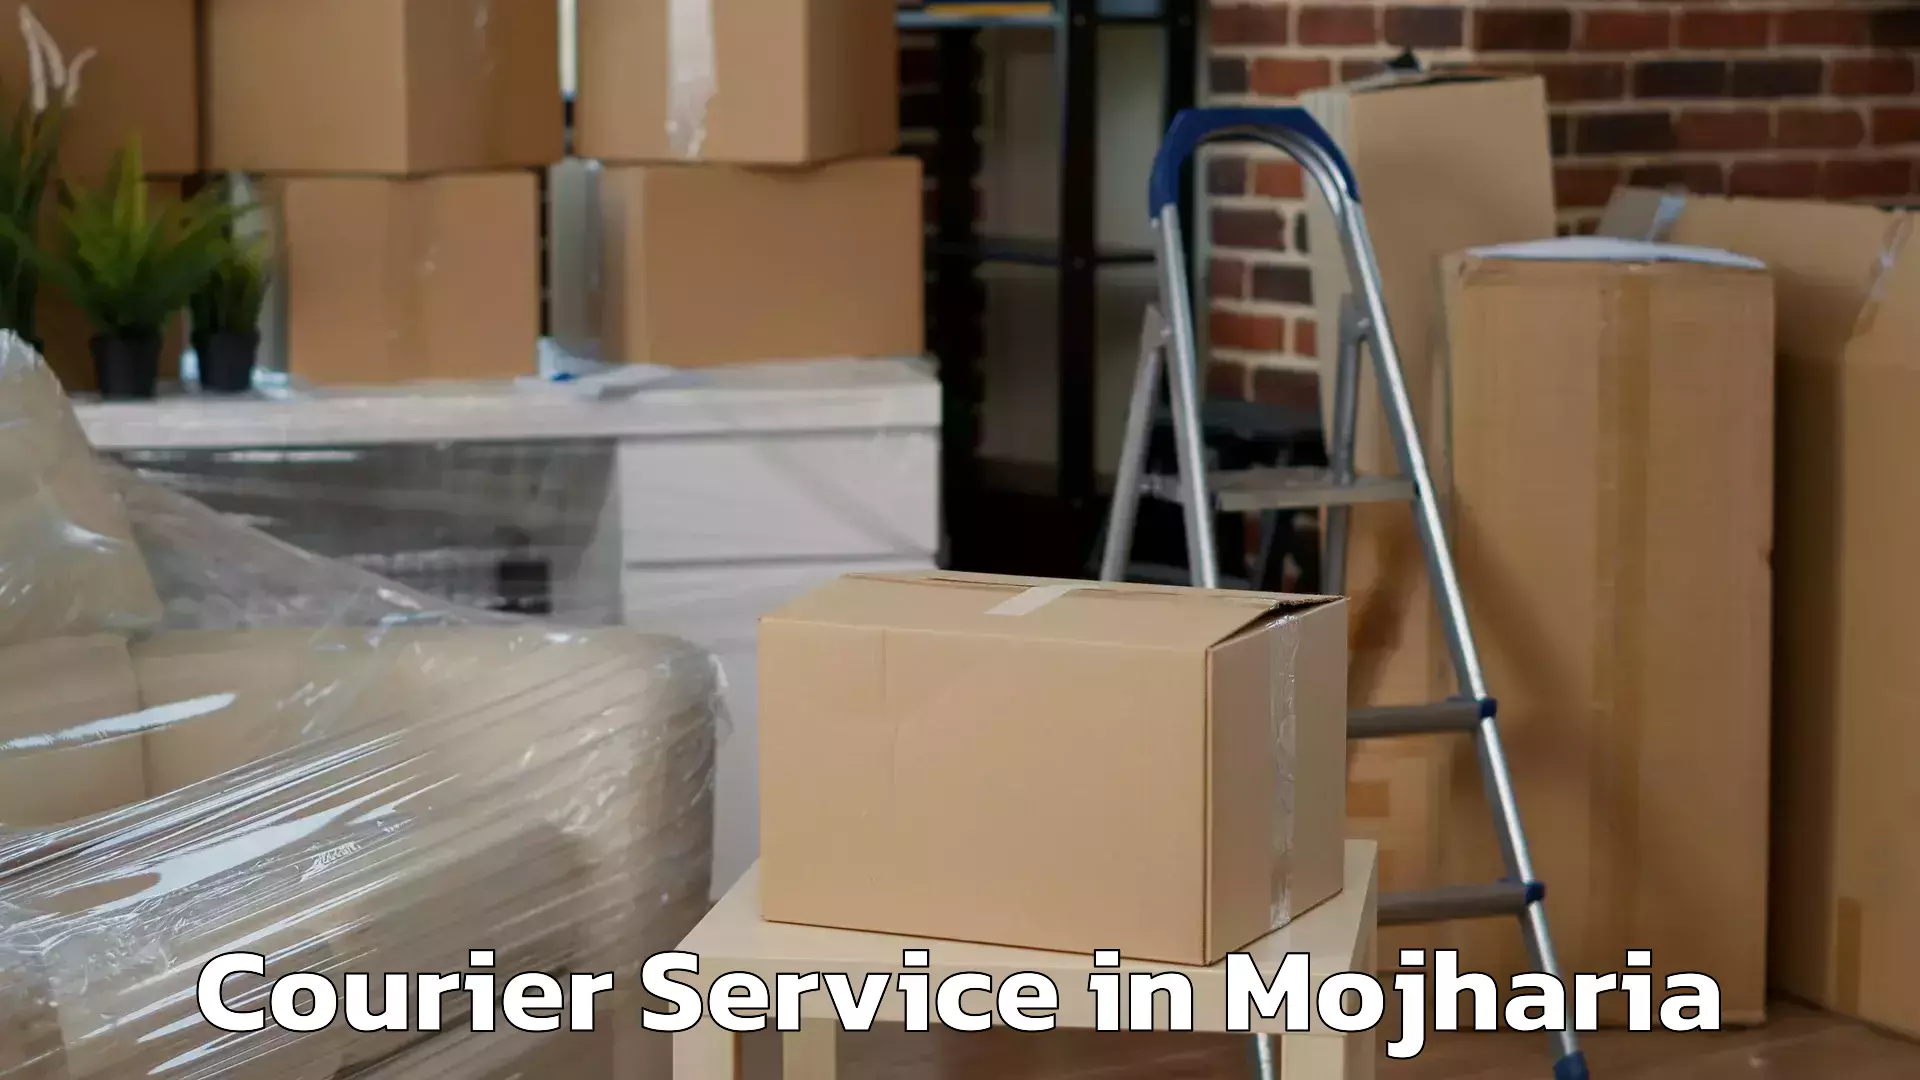 24-hour courier service in Mojharia